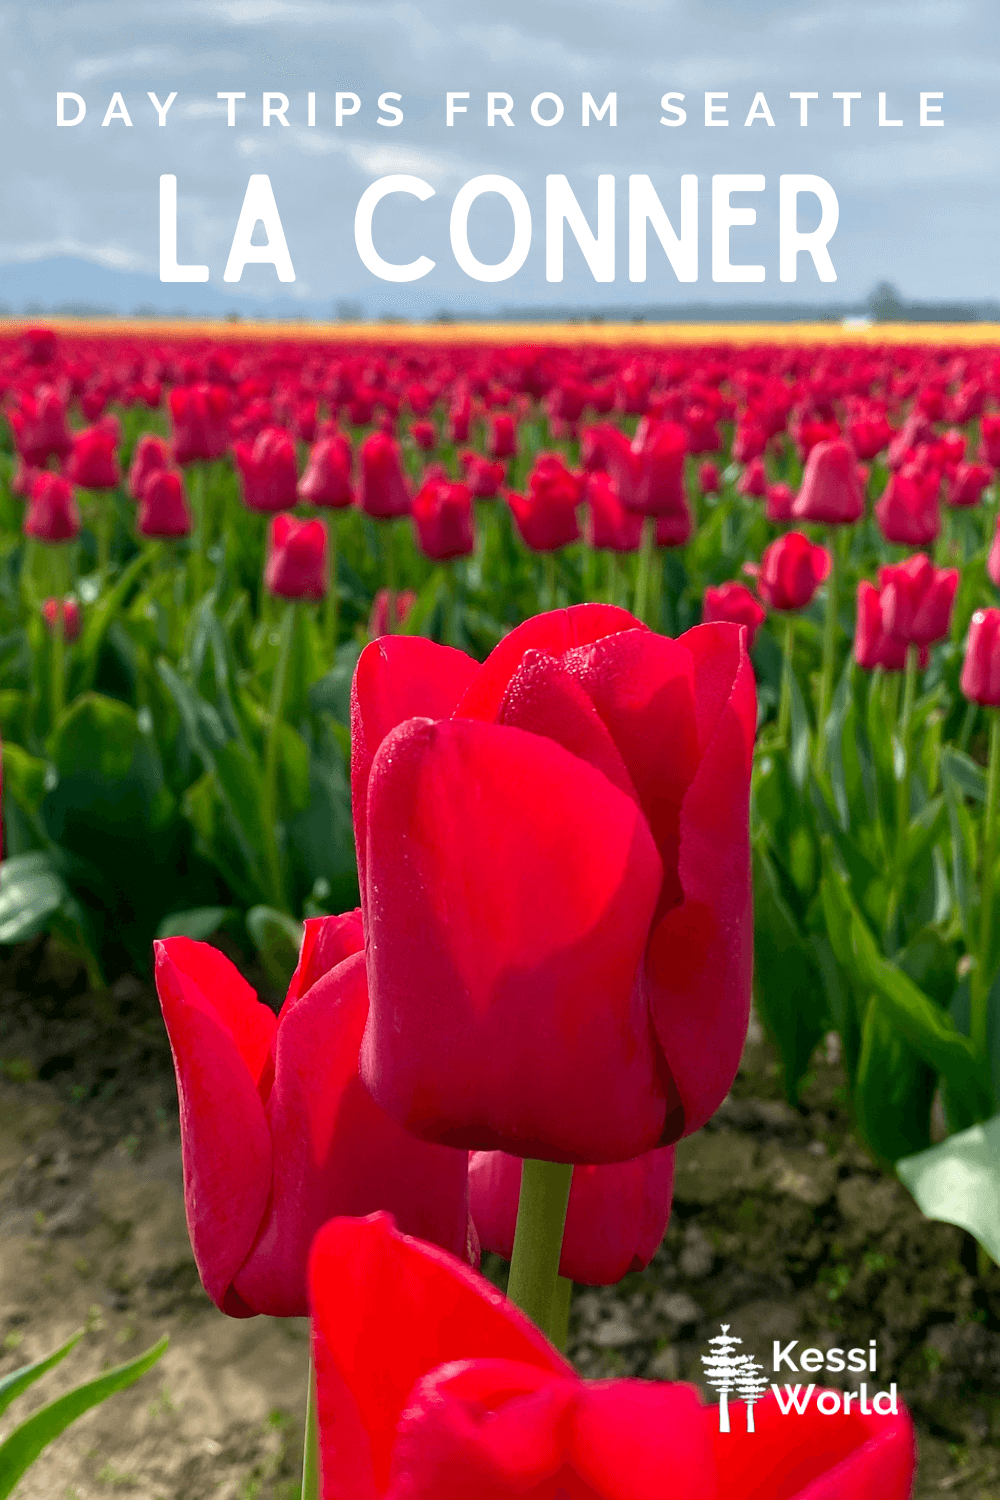 This Pinterest pin displays white letters that read "day trips from Seattle" and highlights La Conner Washington. The photo shows a bright red tulip rising up into the shot while thousands of others in the field beyond are slightly out of focus and contrast with the bright green stems. There is a layer of yellow tulips in the far field and the sky is gray and cloudy.